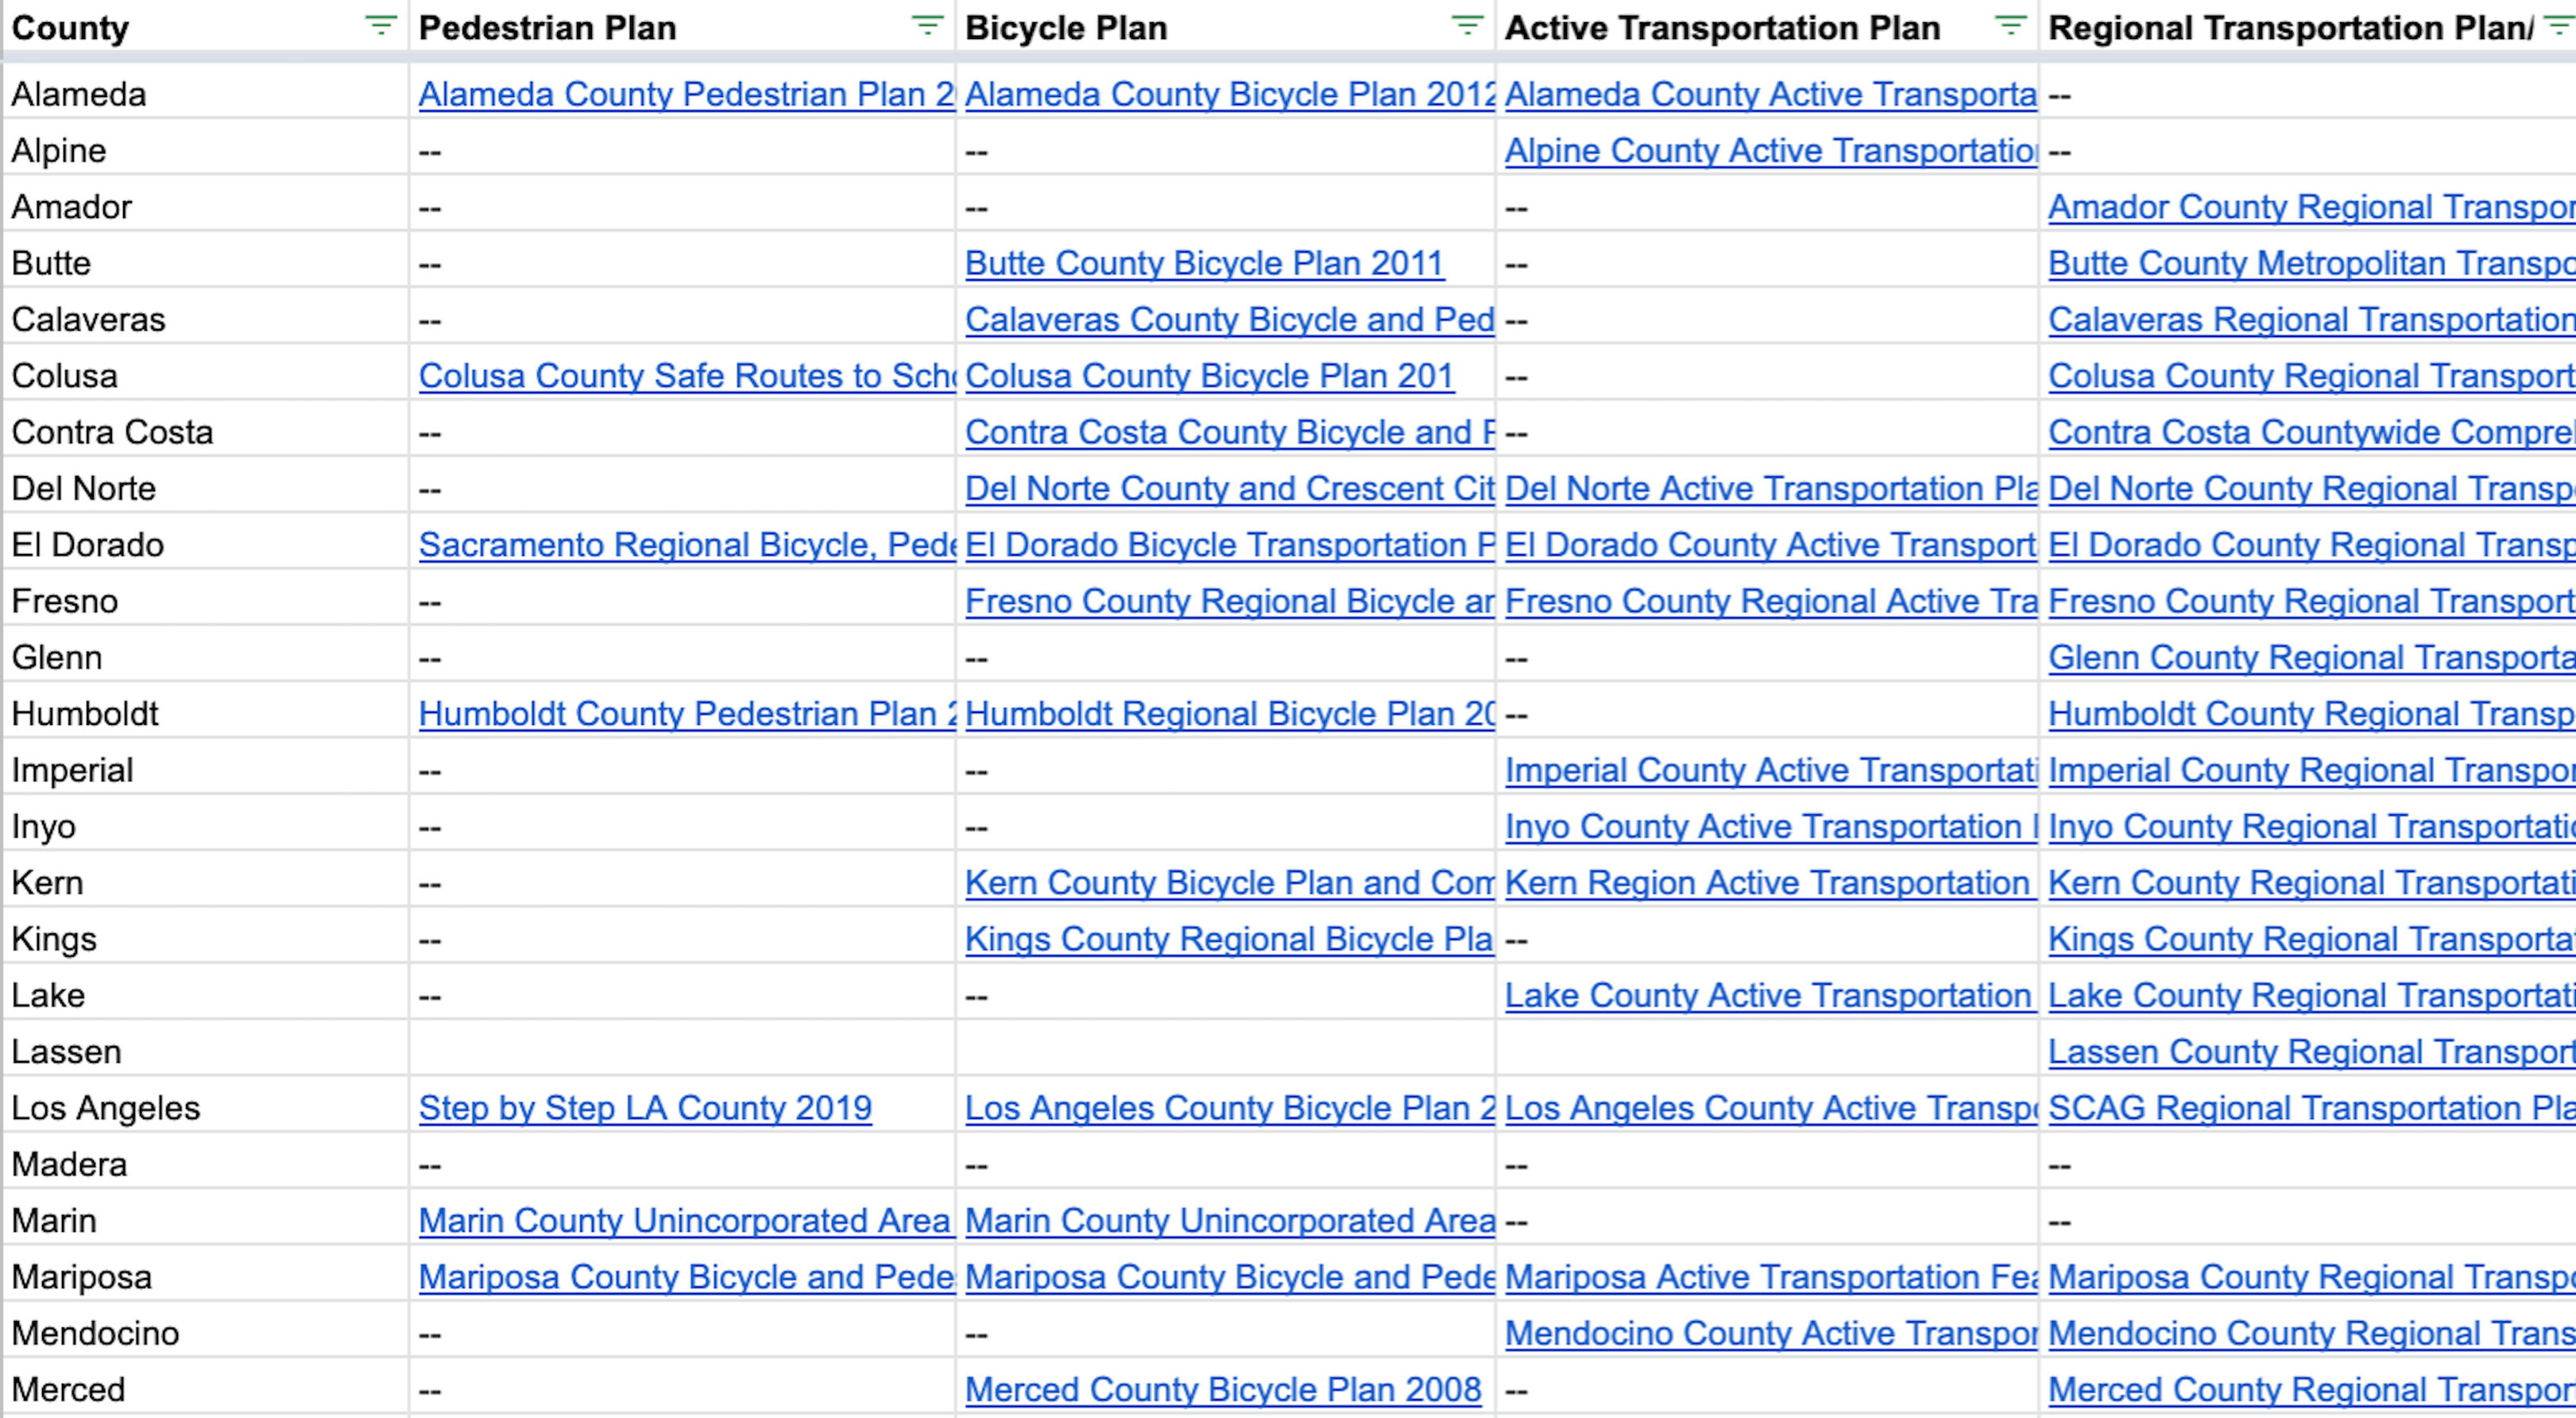 Screen capture of Master Plans by County spreadsheet.